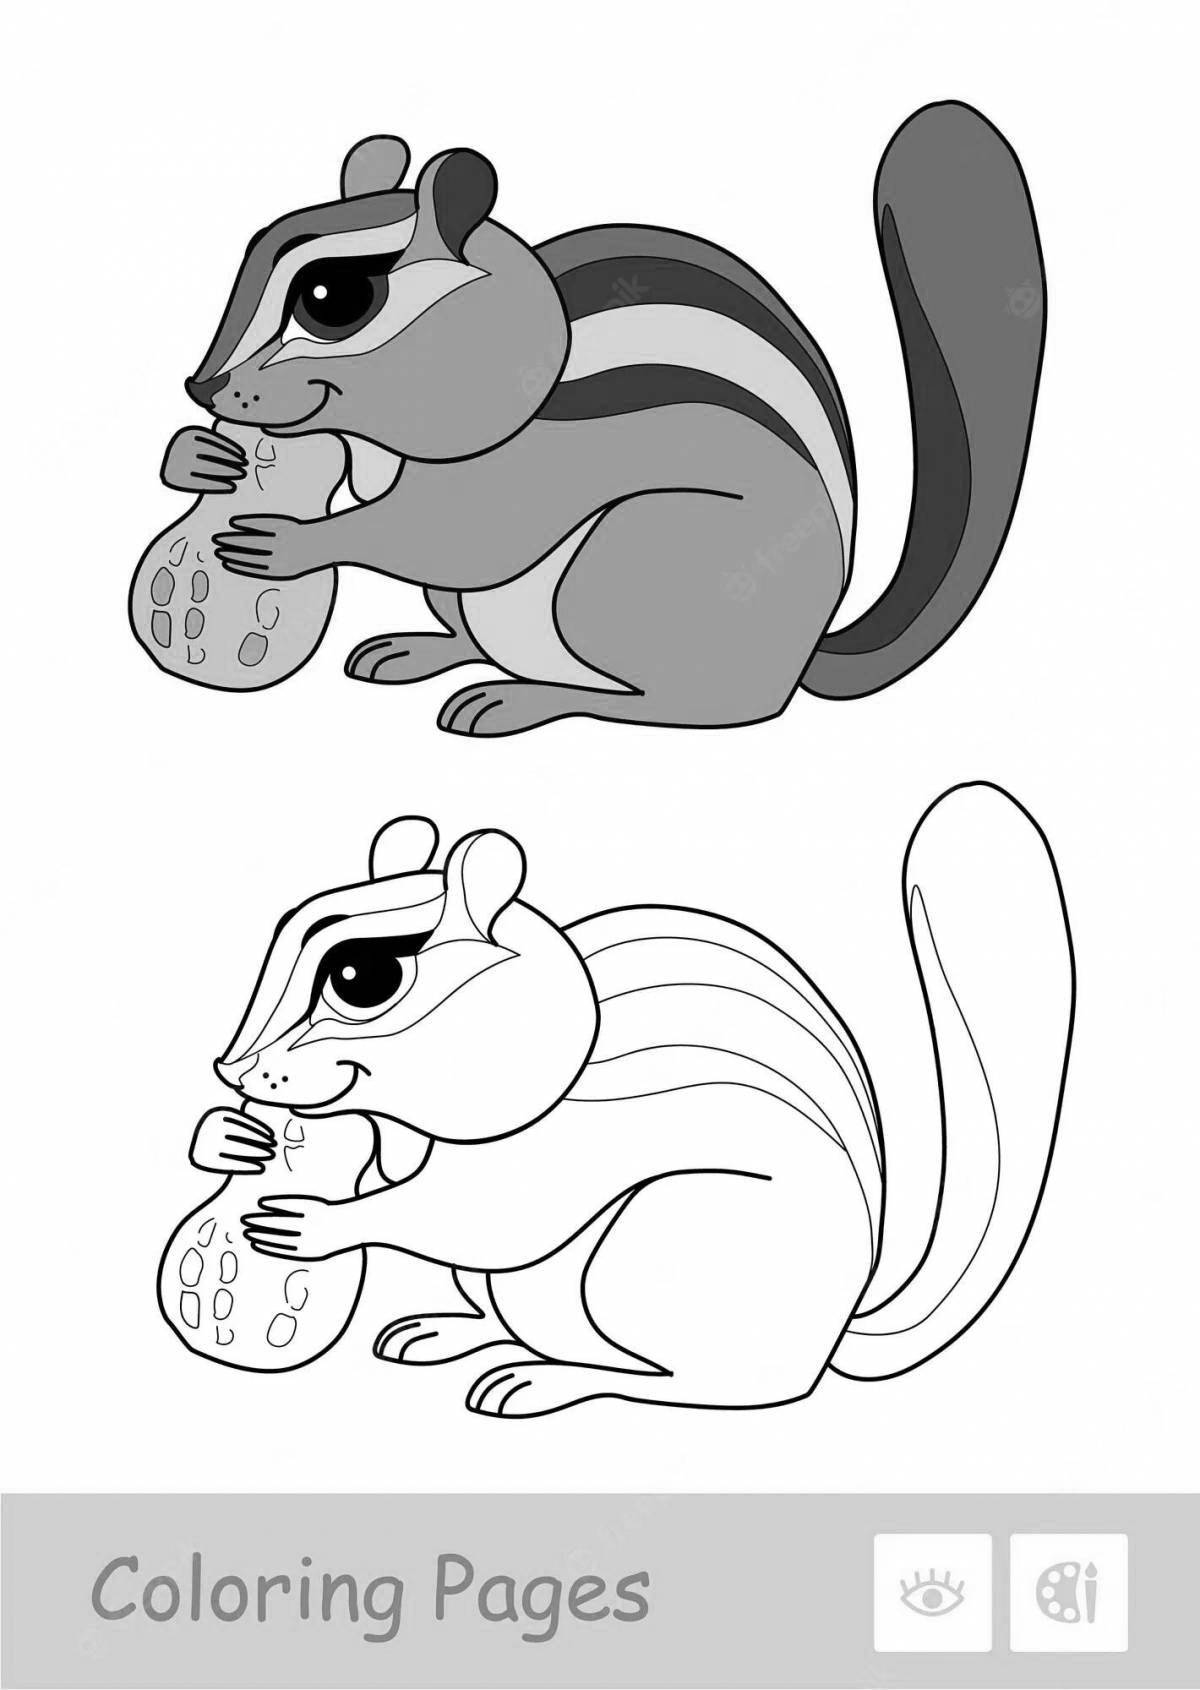 Exciting chipmunk coloring book for kids